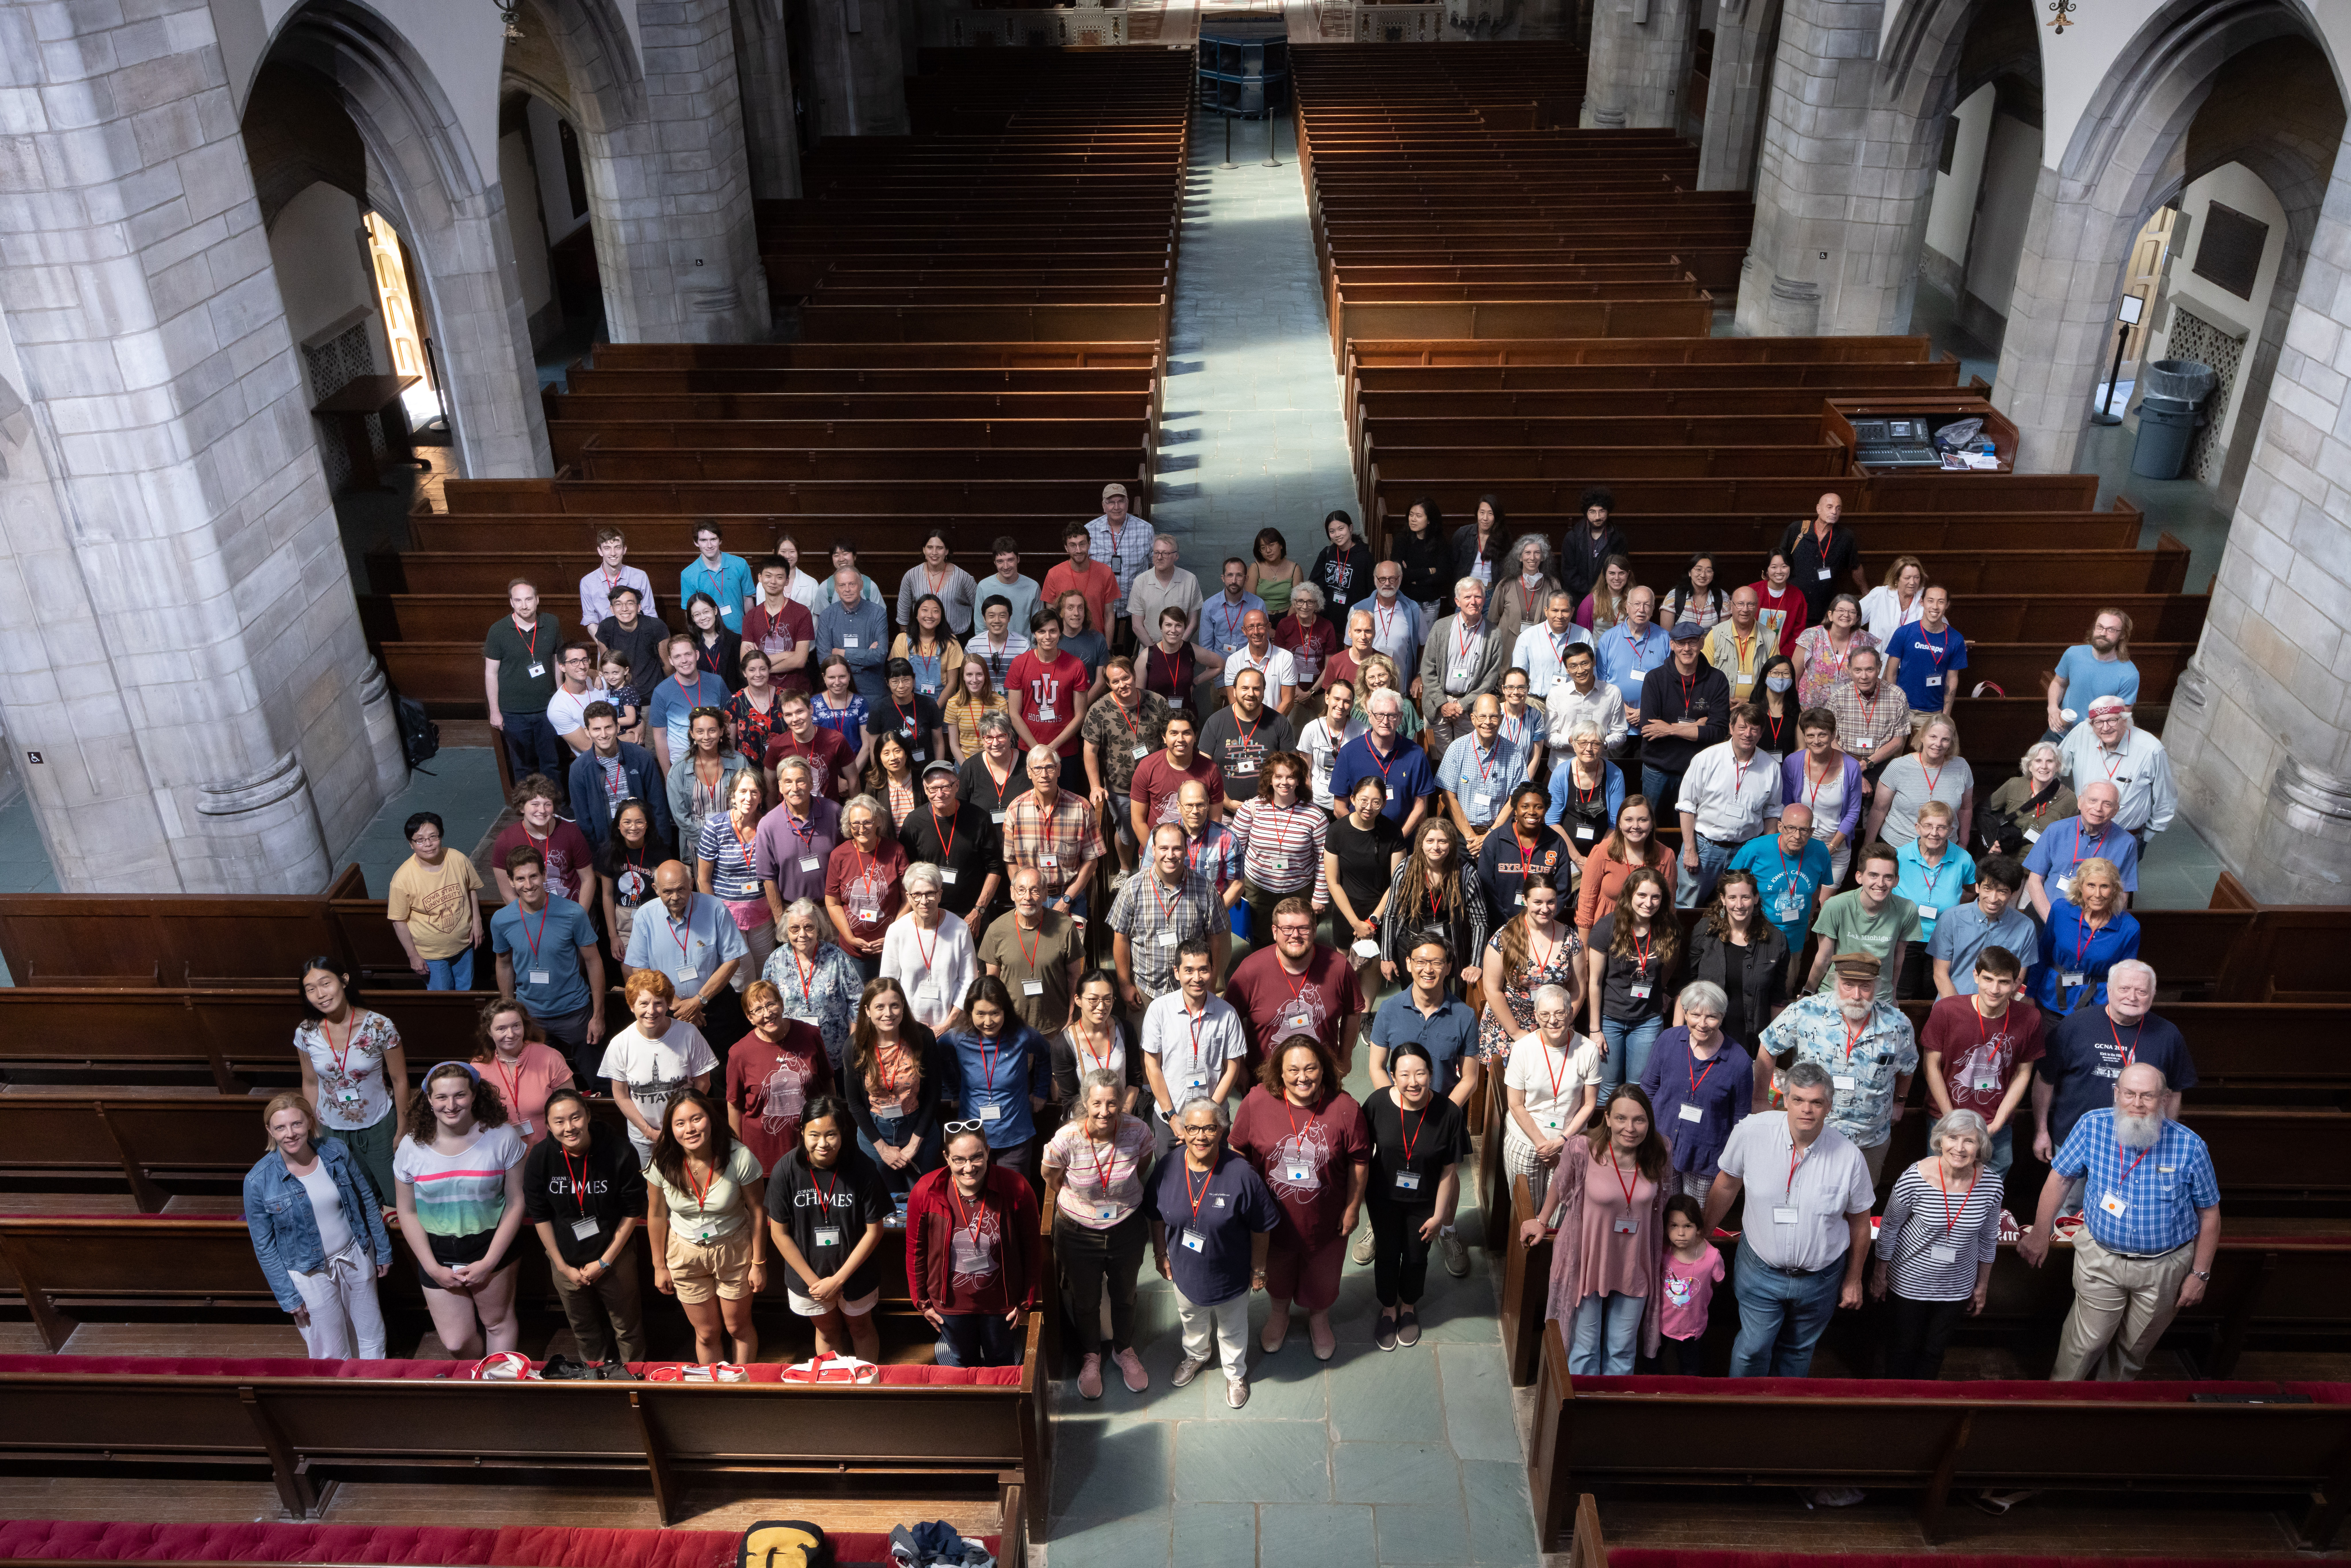 Group photograph of nearly 140 people in a large stone church standing between several wooden pews and smiling up at the camera